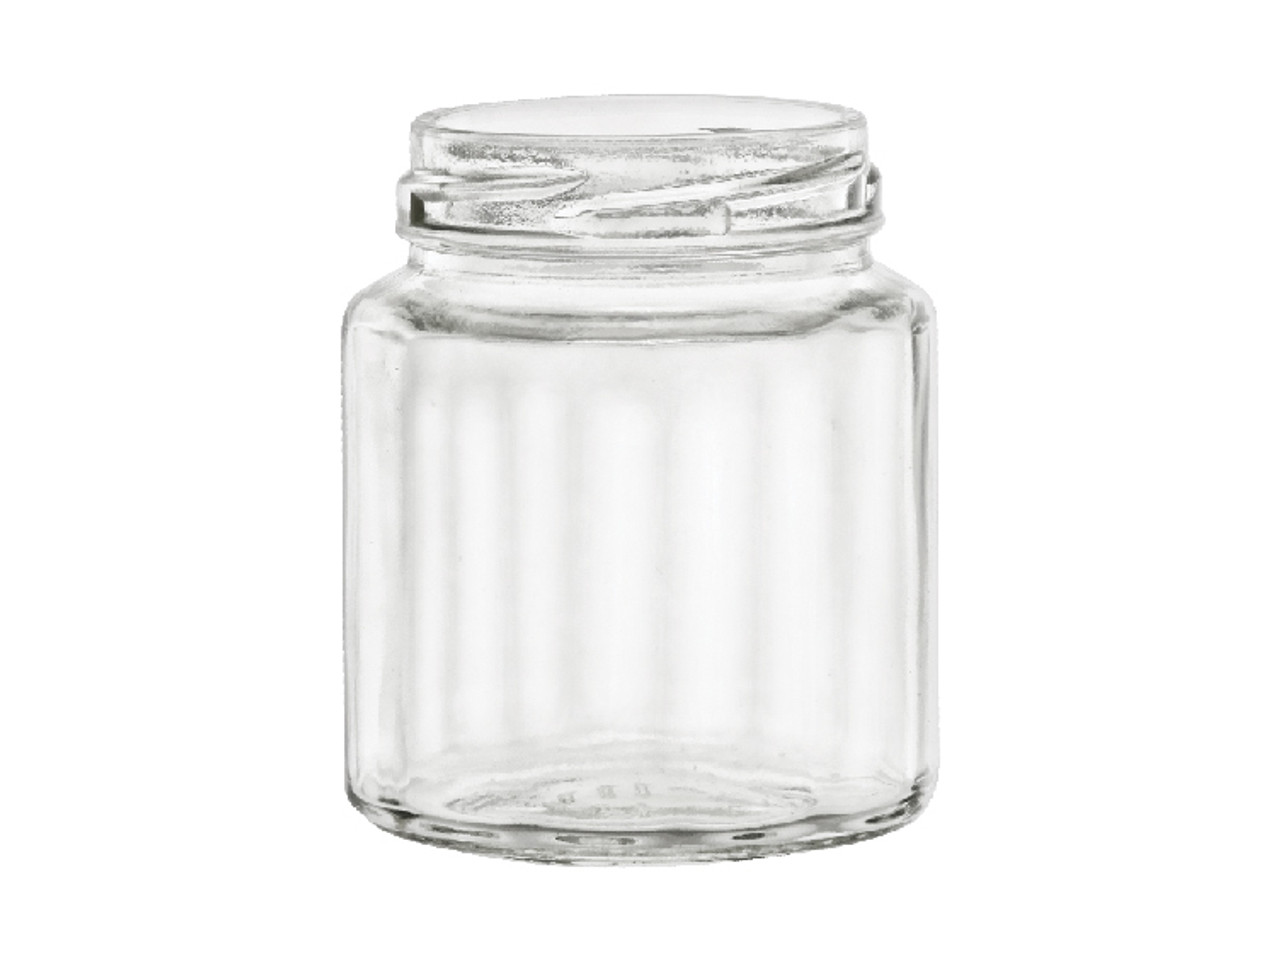 8 oz Faceted Round Glass Jar w/ Lid